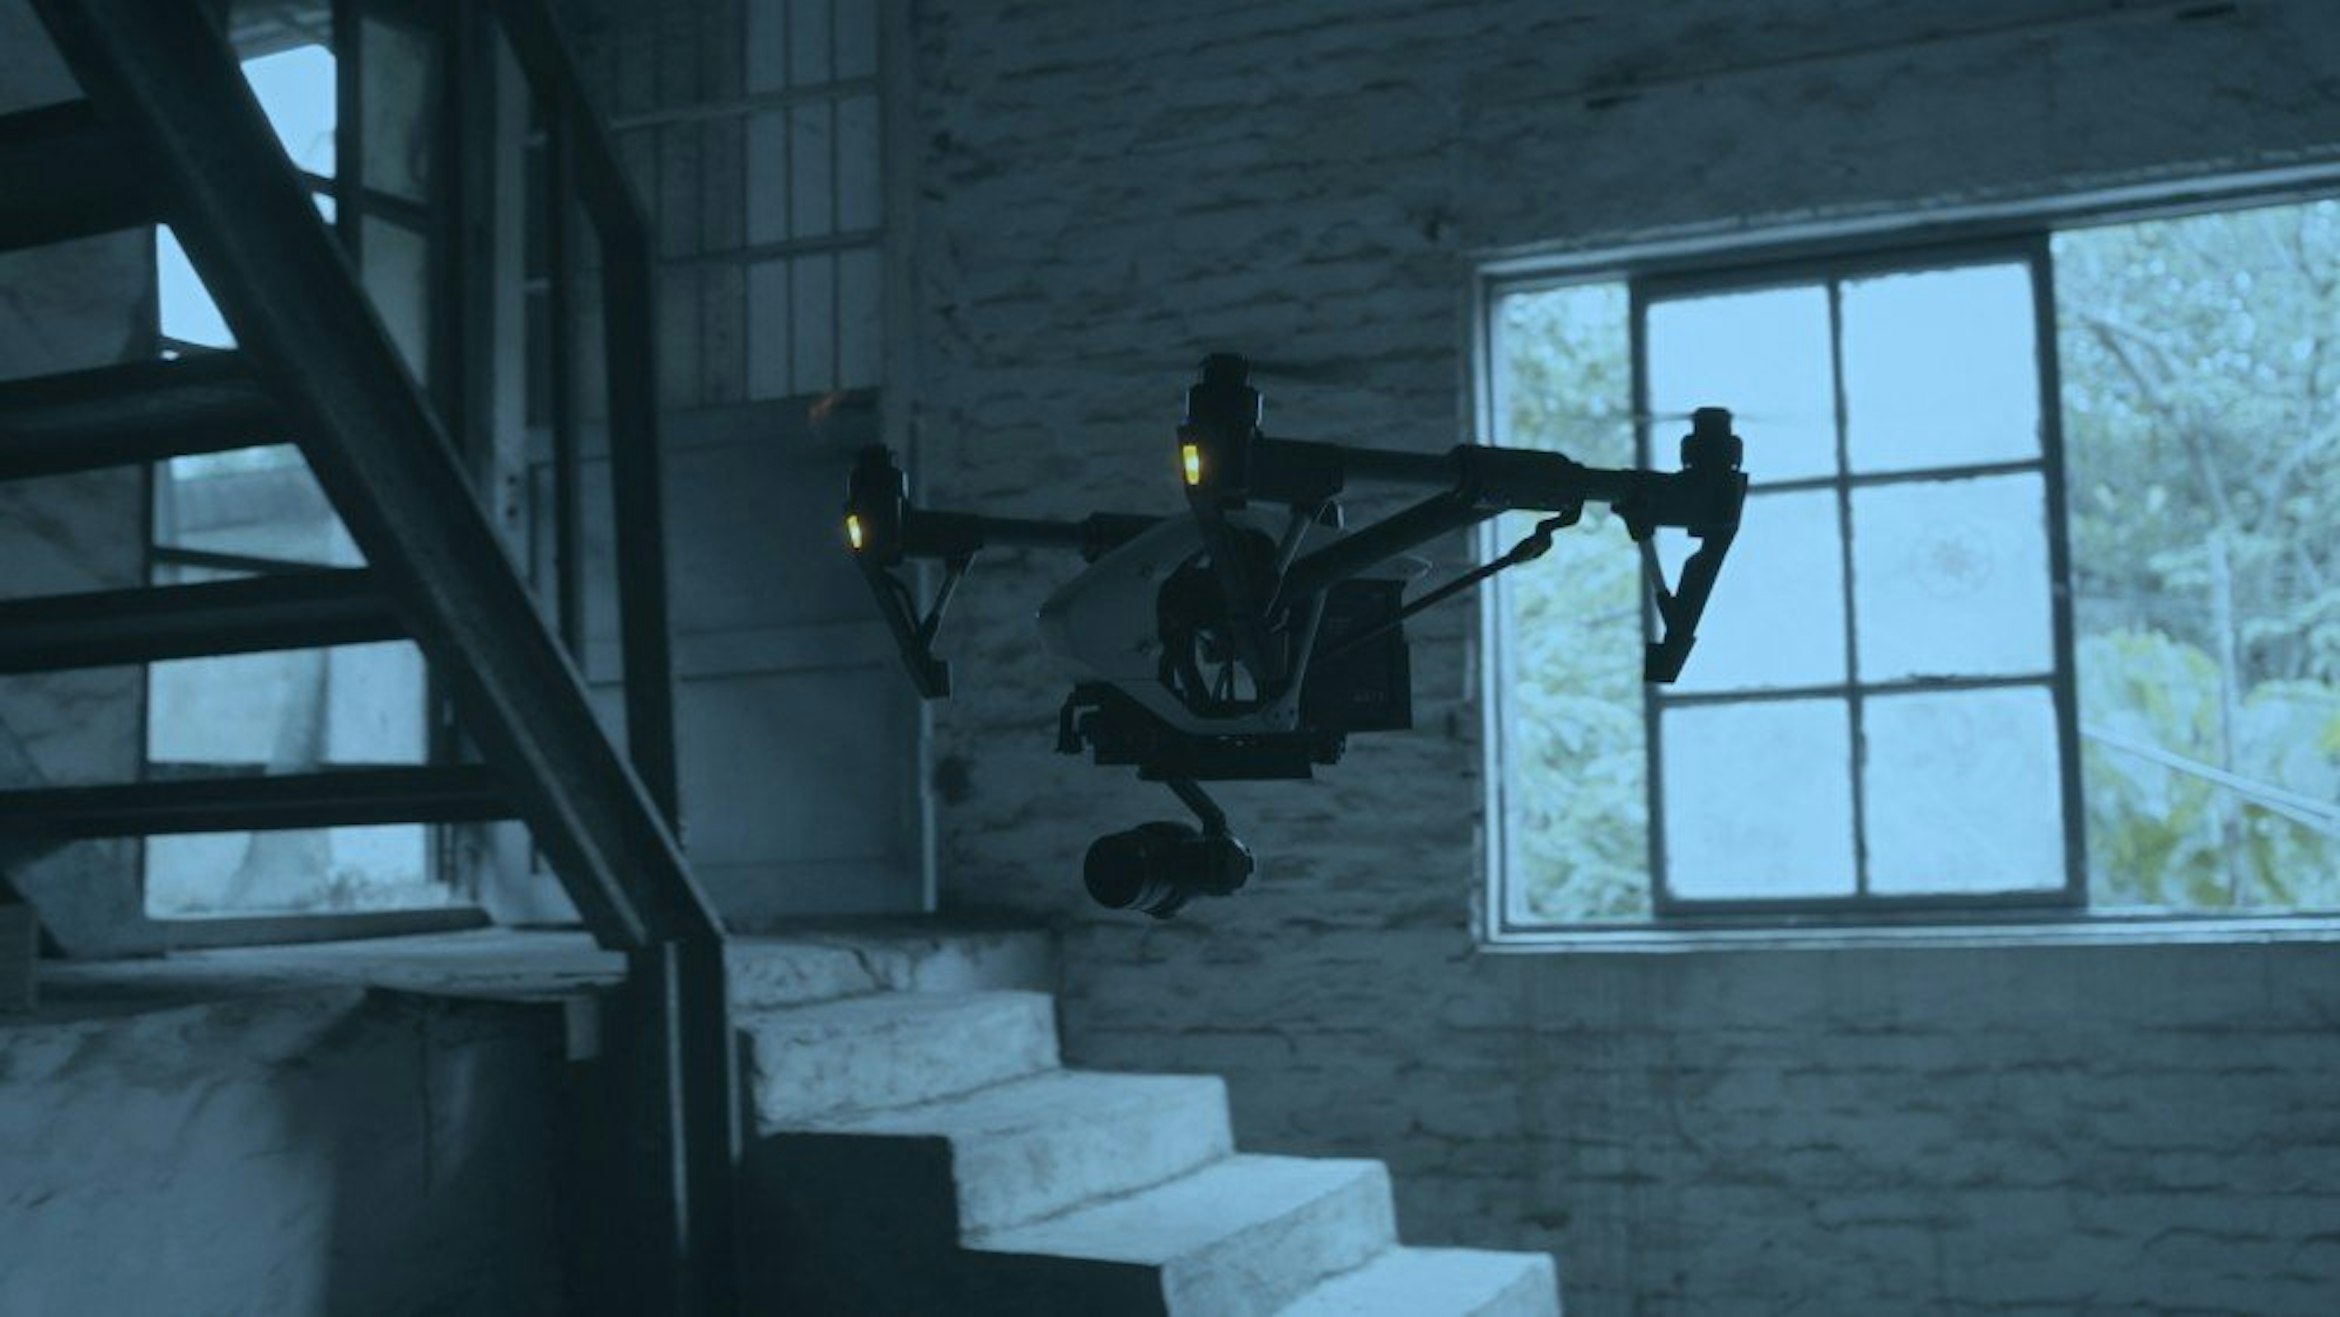 A drone flies through the inside of a building which has concrete steps and a window outside to greenery. The colour of the image is blueish grey as if its dawn, dusk or a very cloudy day